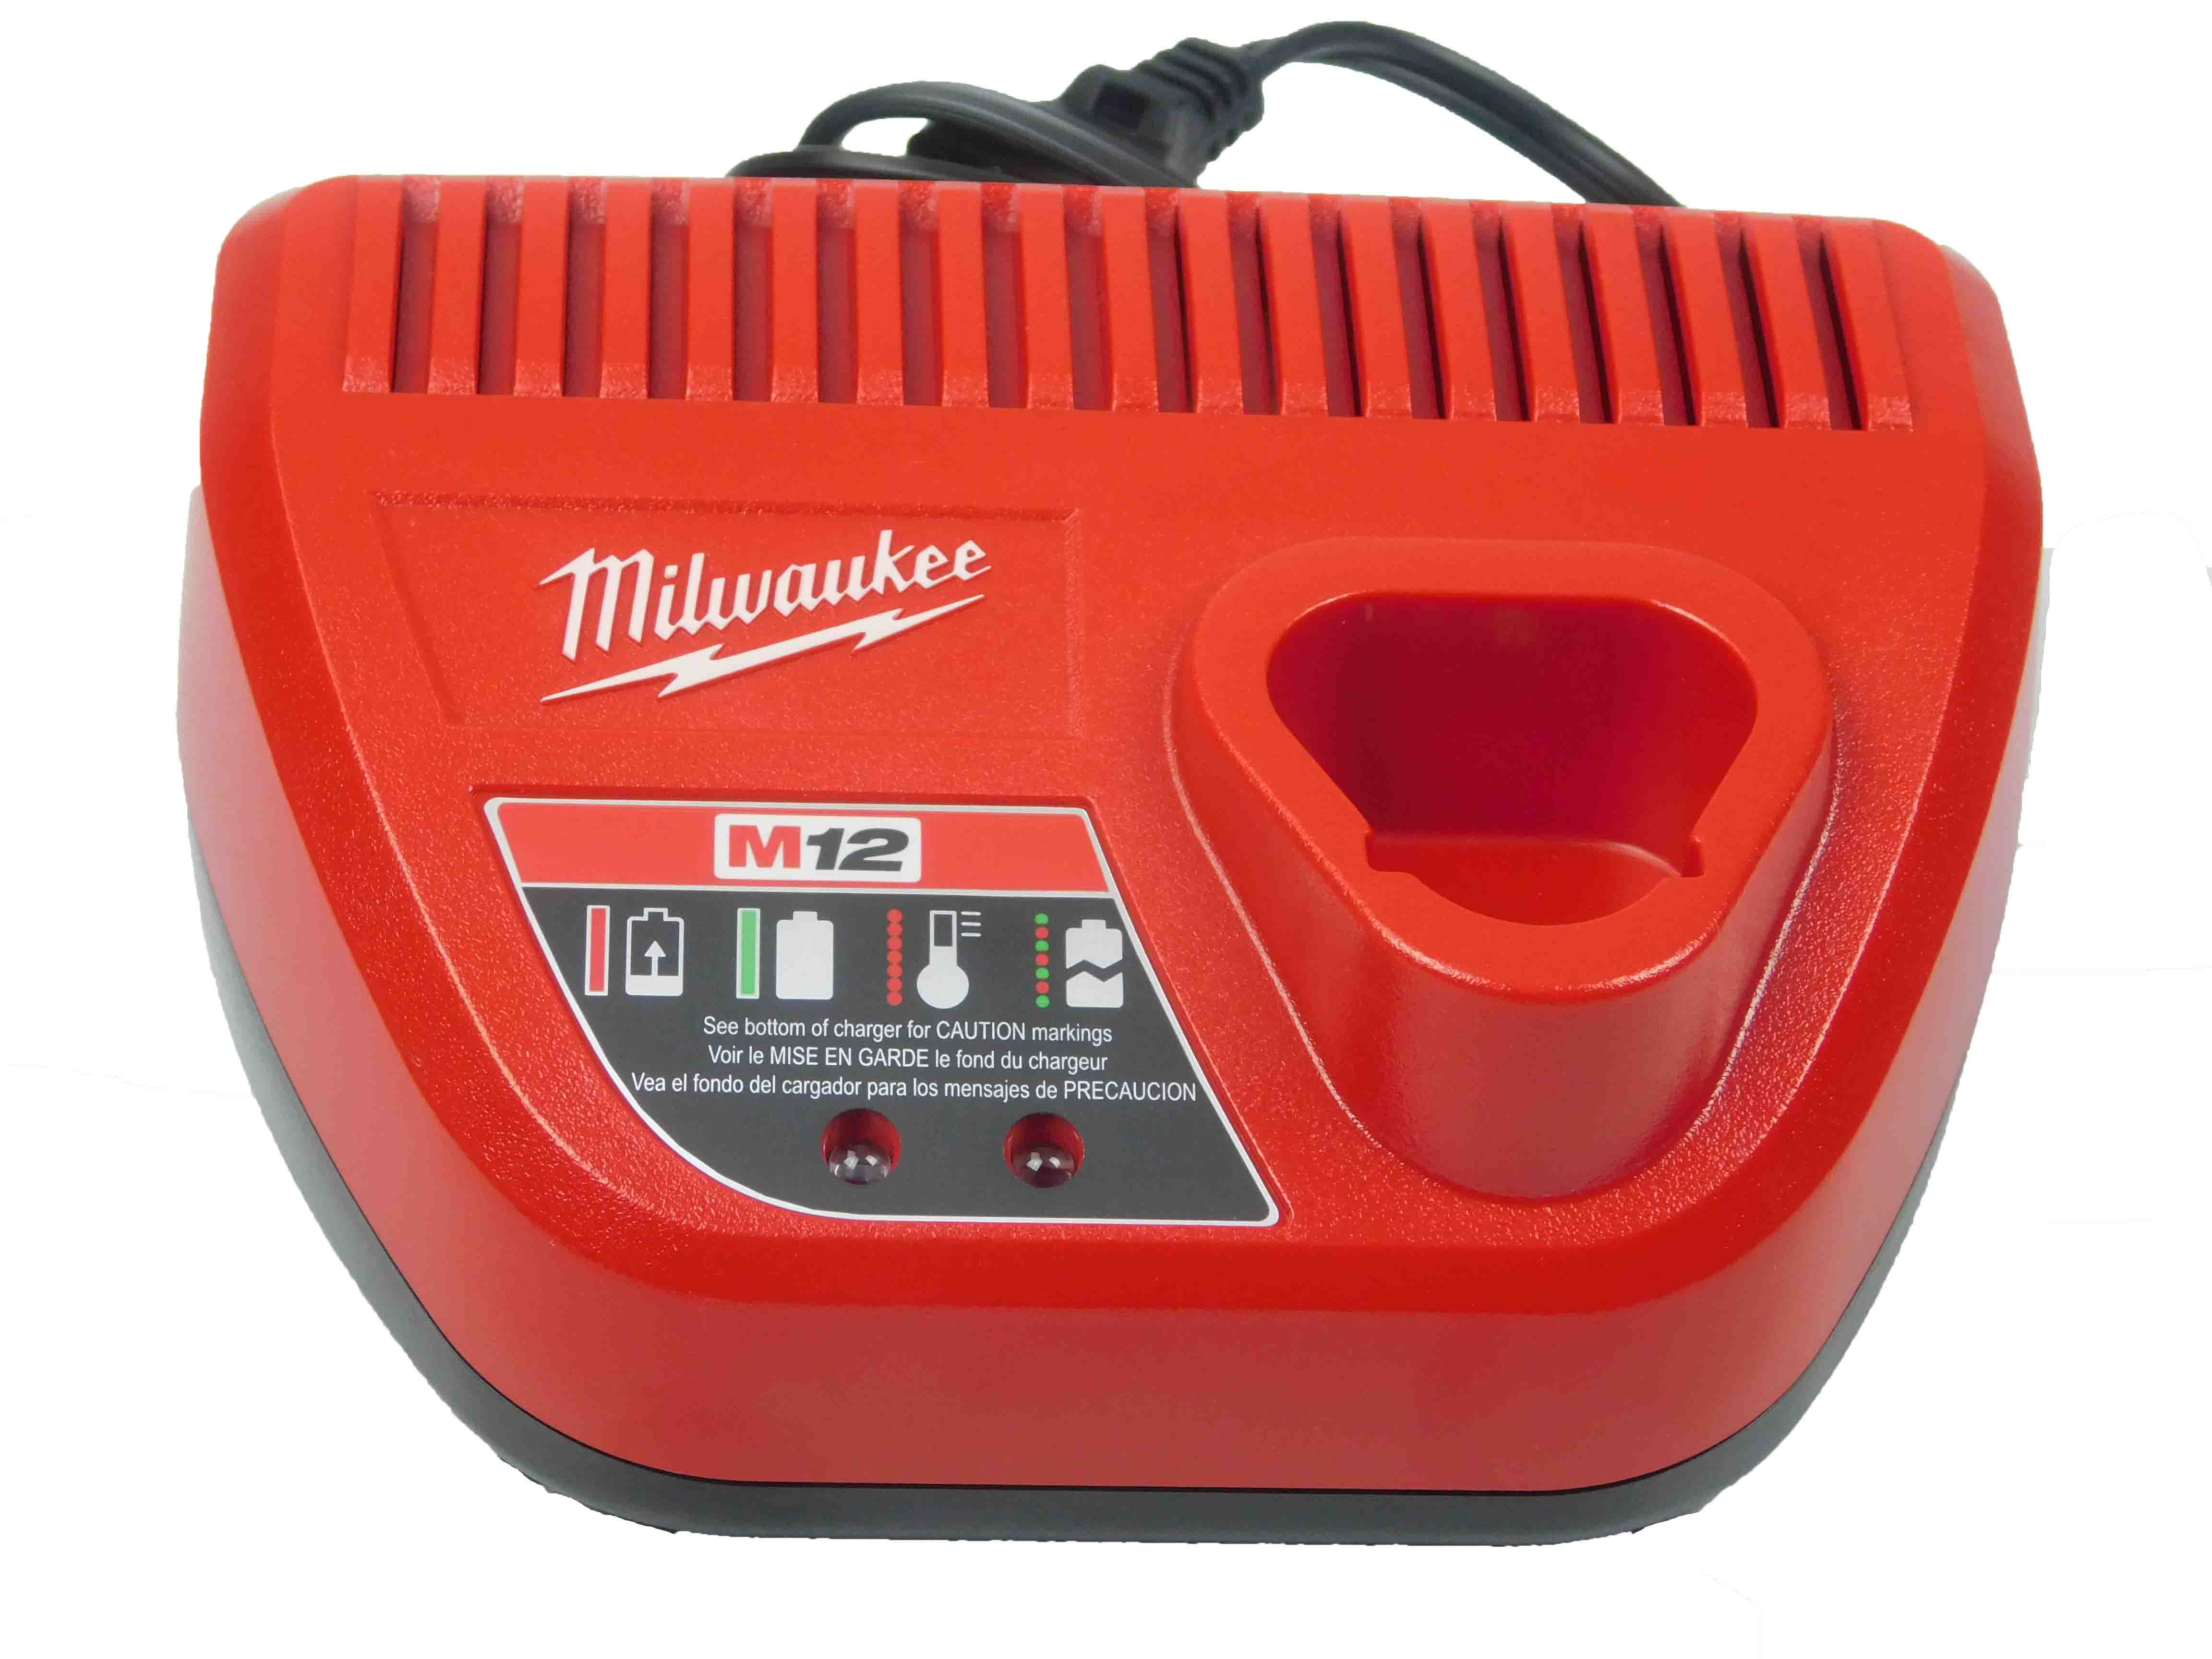 Brand New Milwaukee M12 Lithium Ion 12 Volt Battery Charger 48-59-2401 